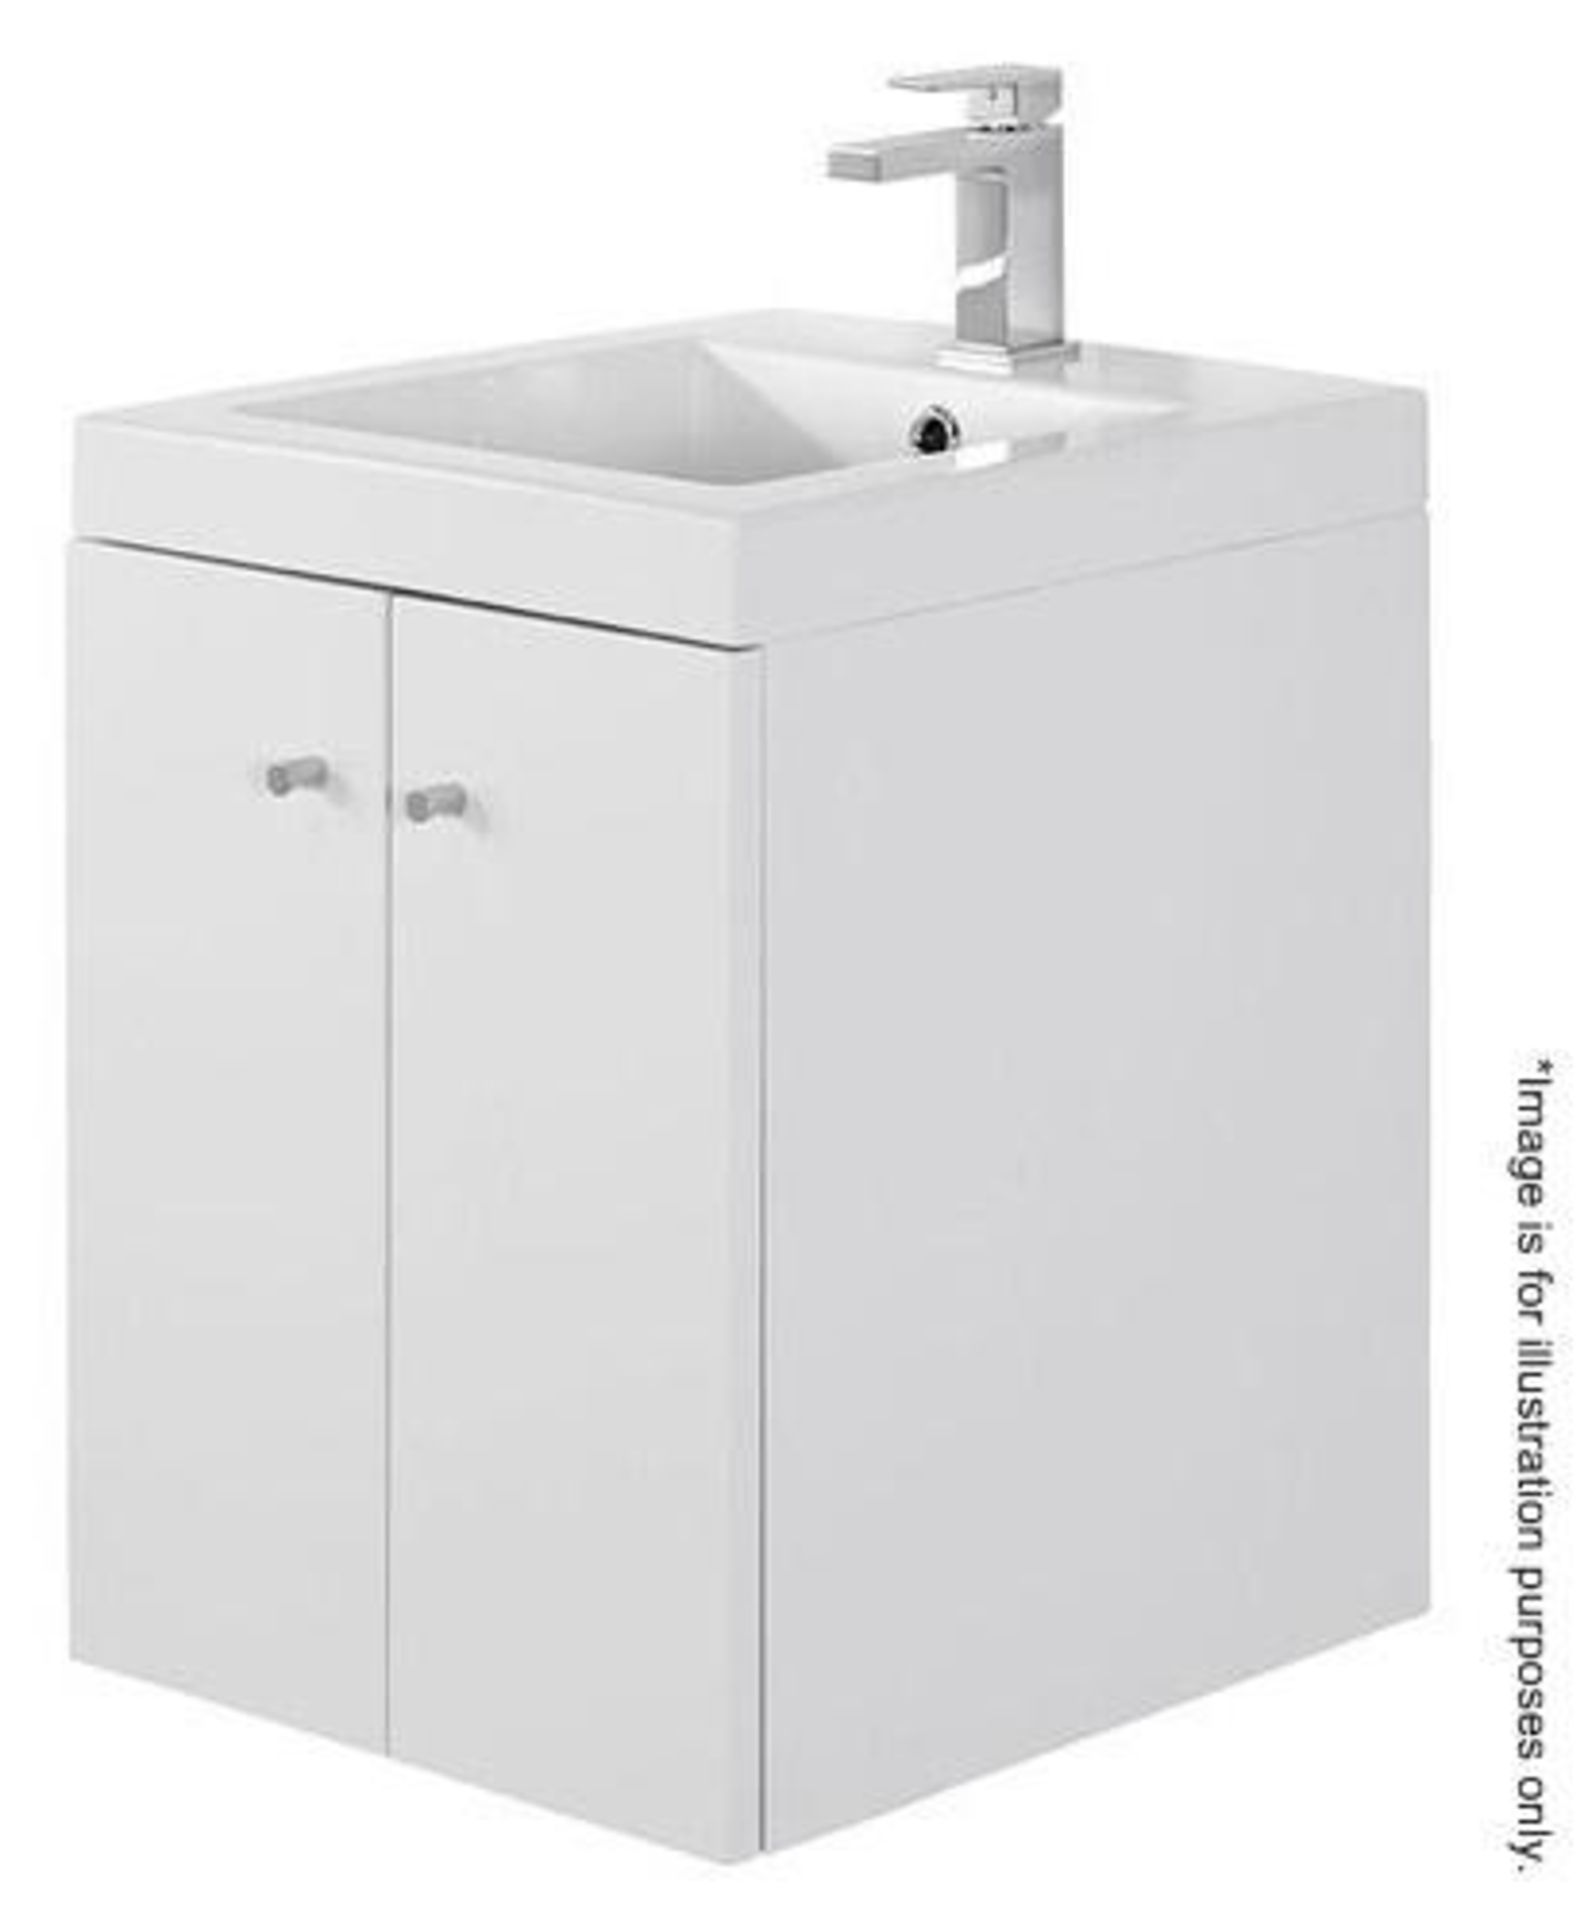 5 x Alpine Duo 400 Wall Hung Vanity Units In Gloss White - Brand New Boxed Stock - Dimensions: H49 x - Image 2 of 5